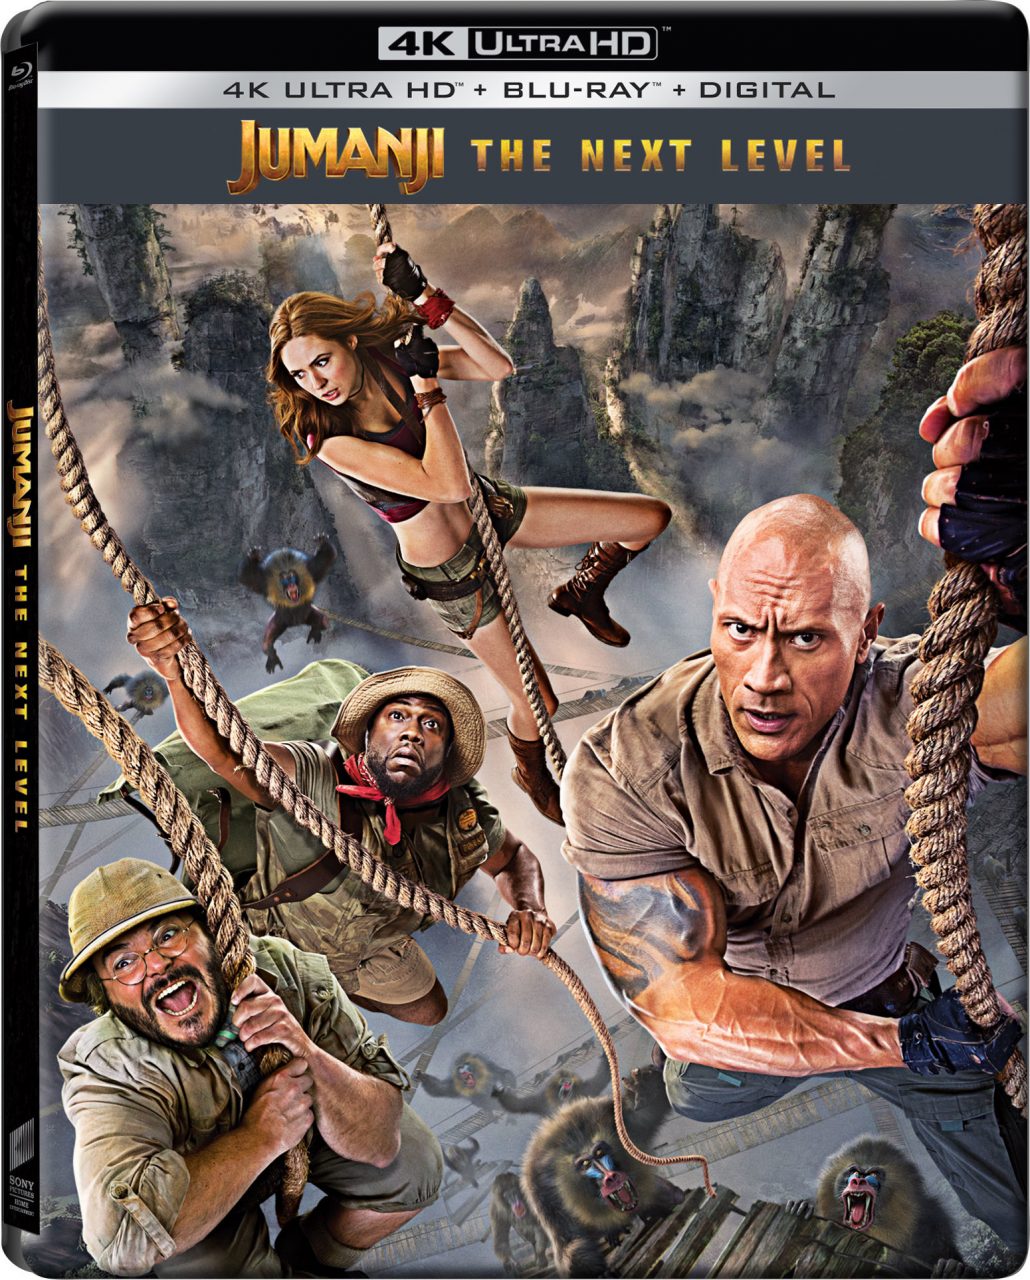 Jumanji: The Next Level Steelbook 4K Ultra HD Combo Pack cover (Sony Pictures Home Entertainment)